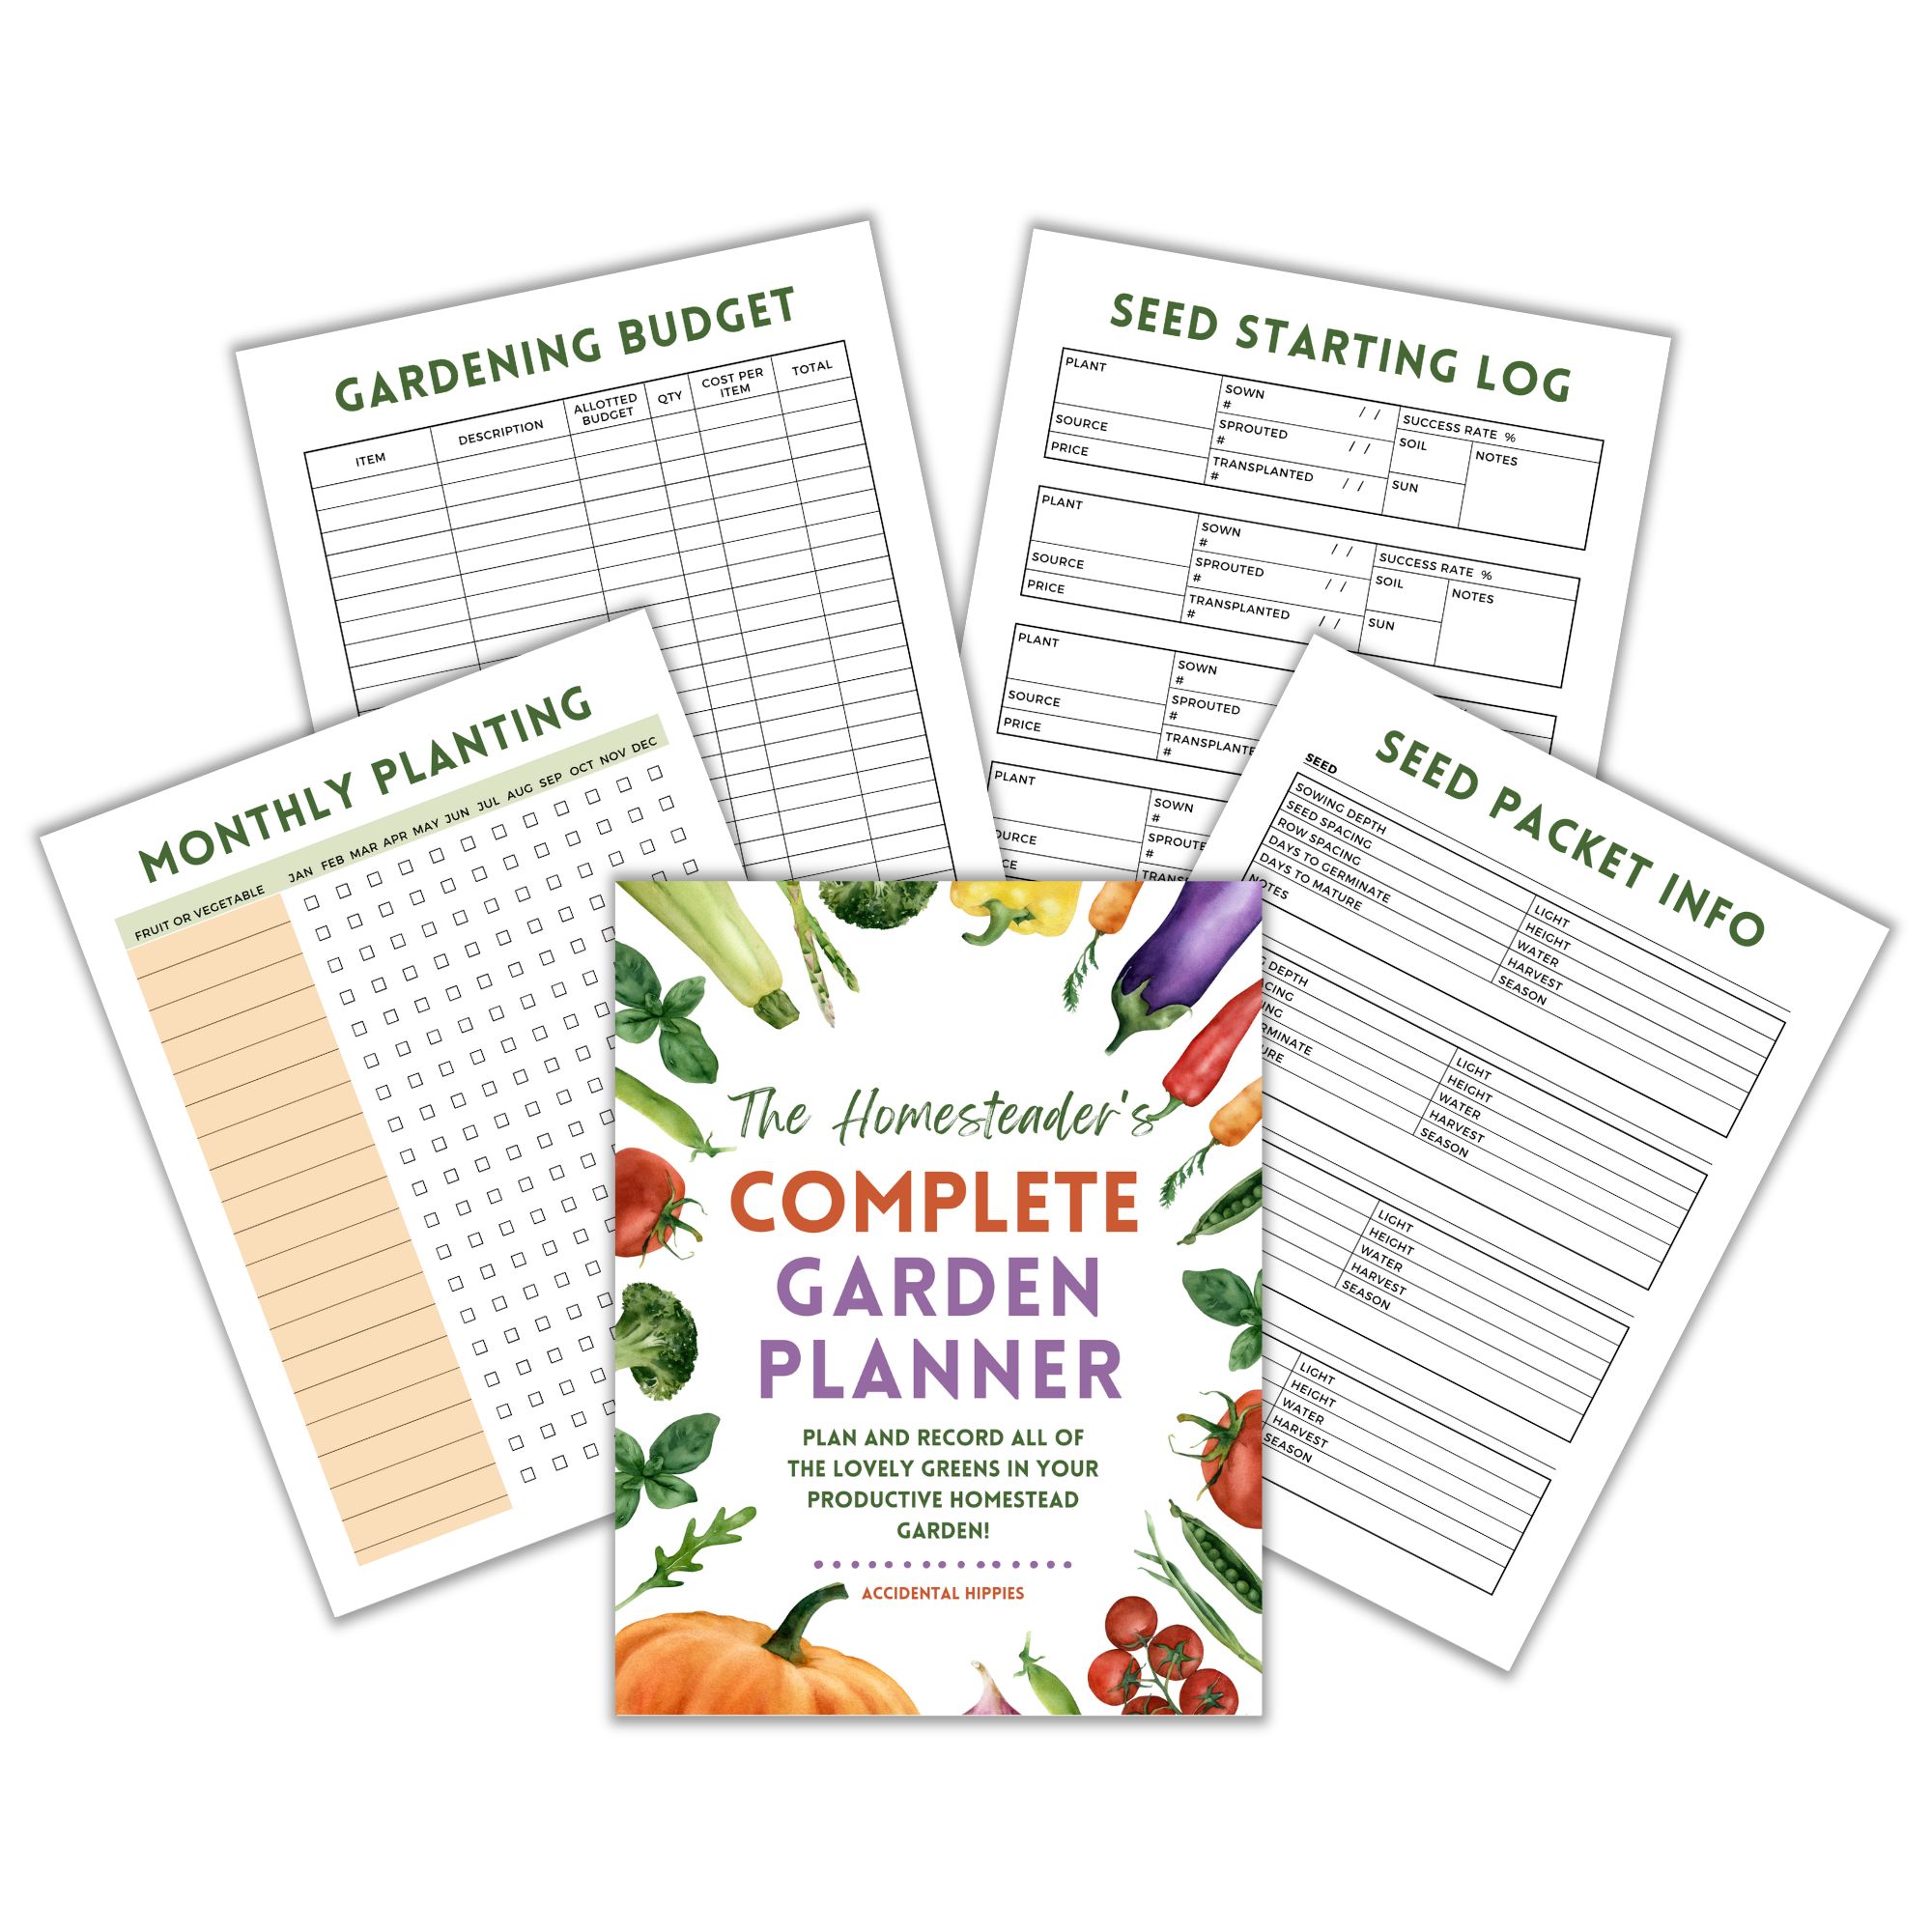 page mockup showing The Homesteader's Complete Garden Planner with sample pages